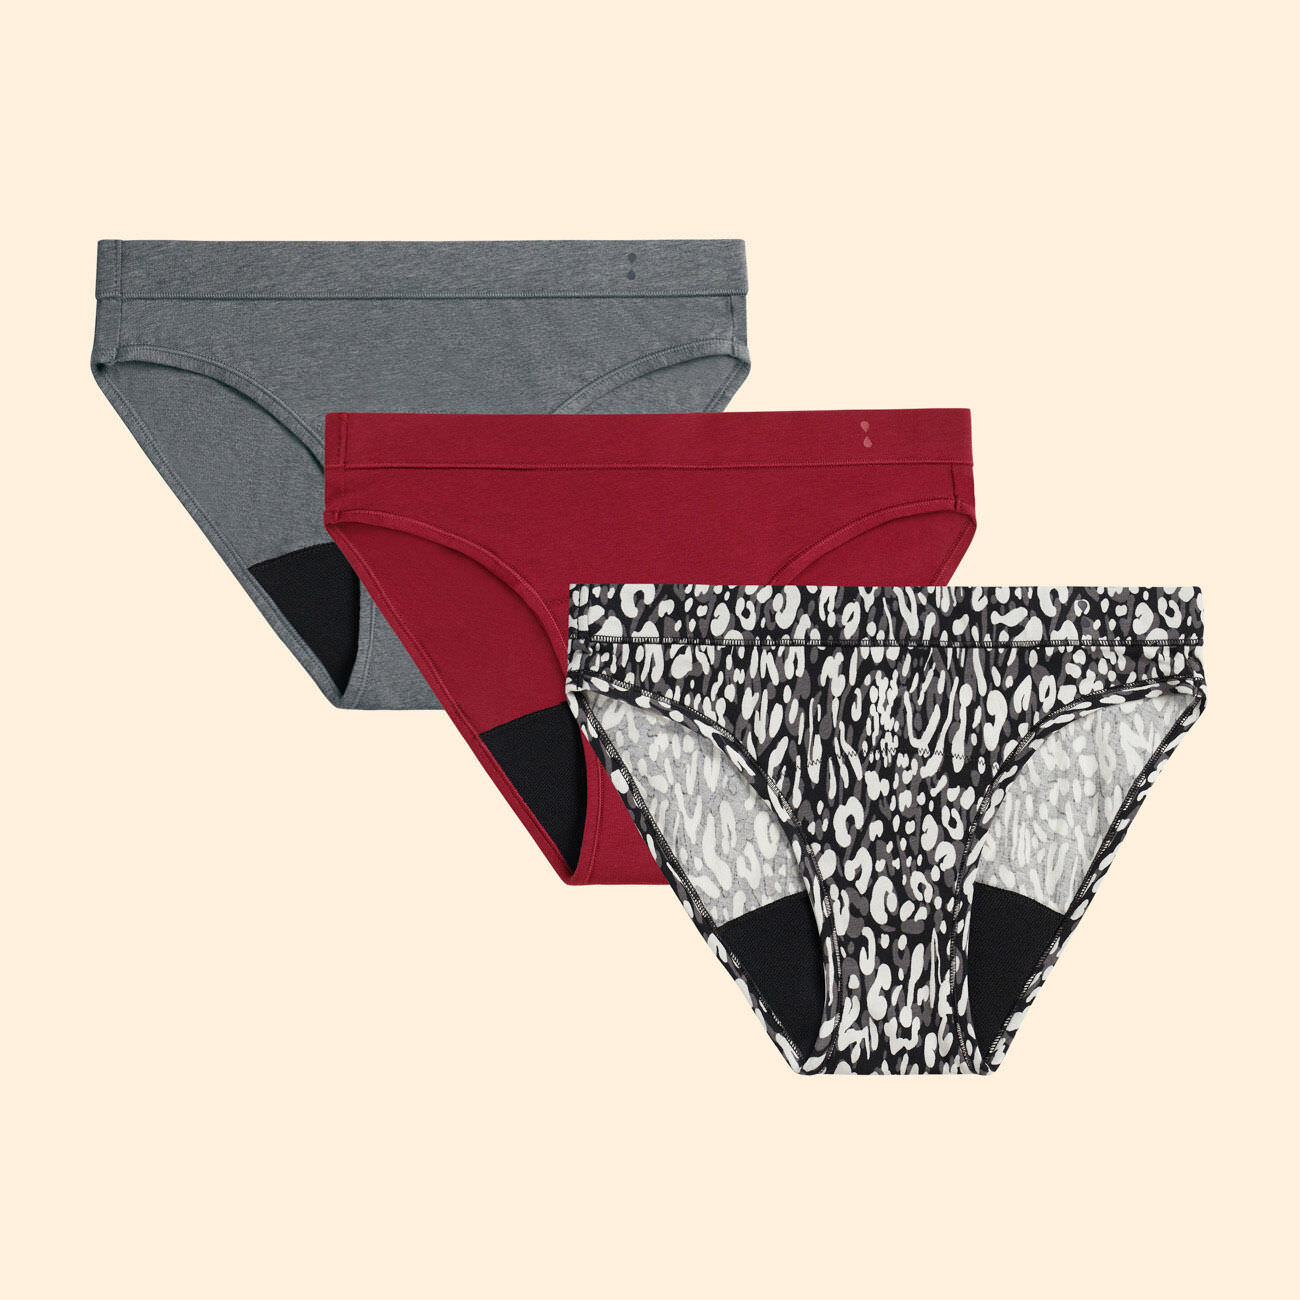 Thinx for All™ Women's Briefs Period Underwear, Super Absorbency, Rhubarb  Red 